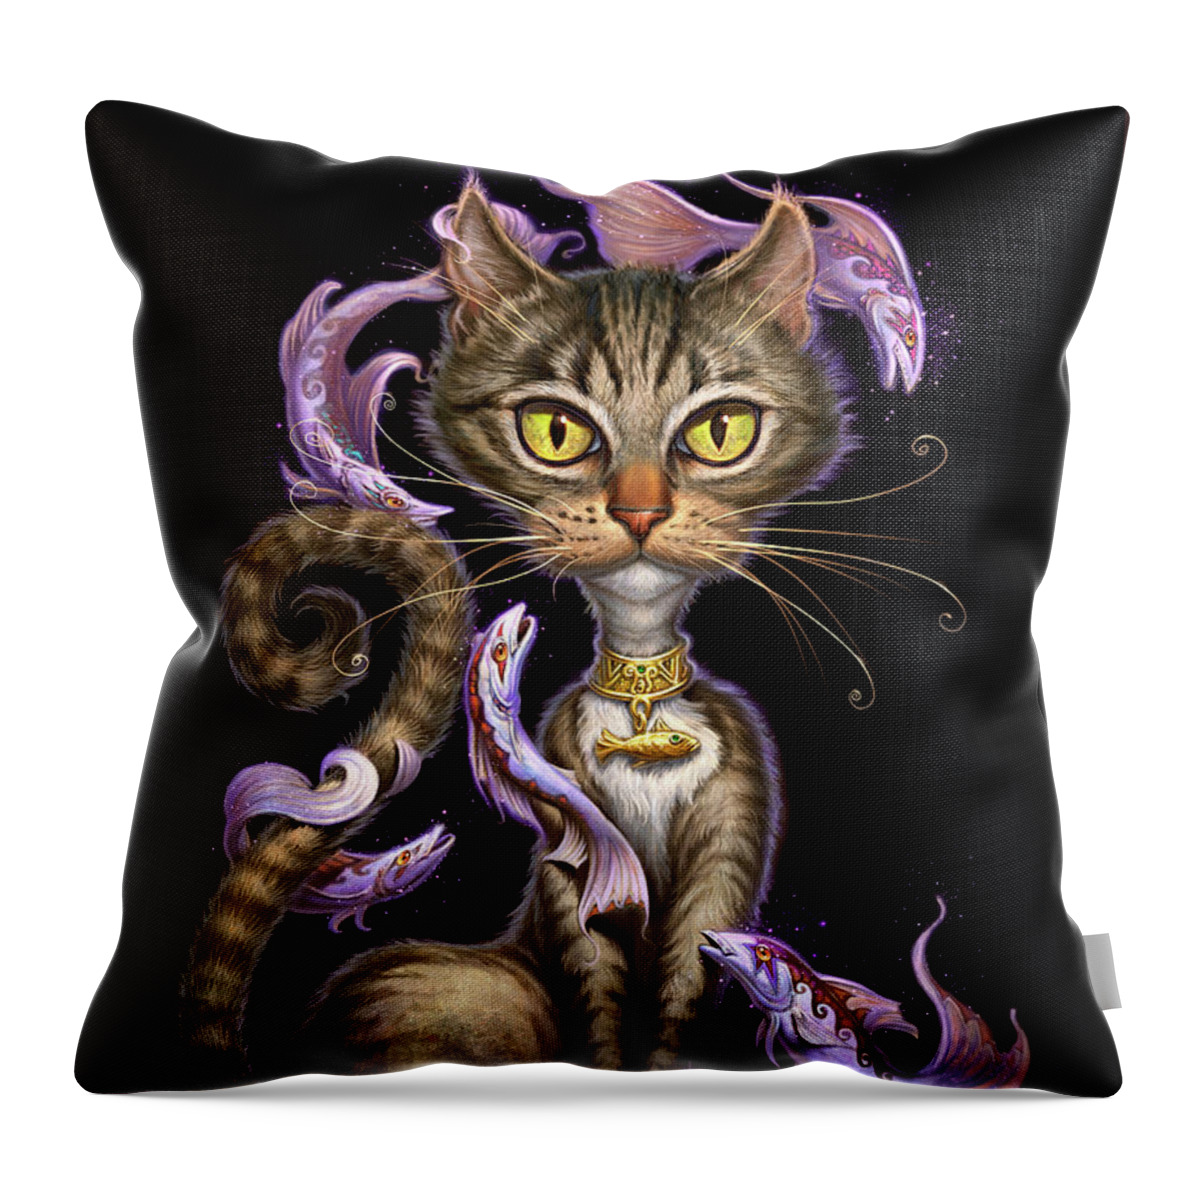 Jeff Haynie Throw Pillow featuring the painting Feline Fantasy by Jeff Haynie